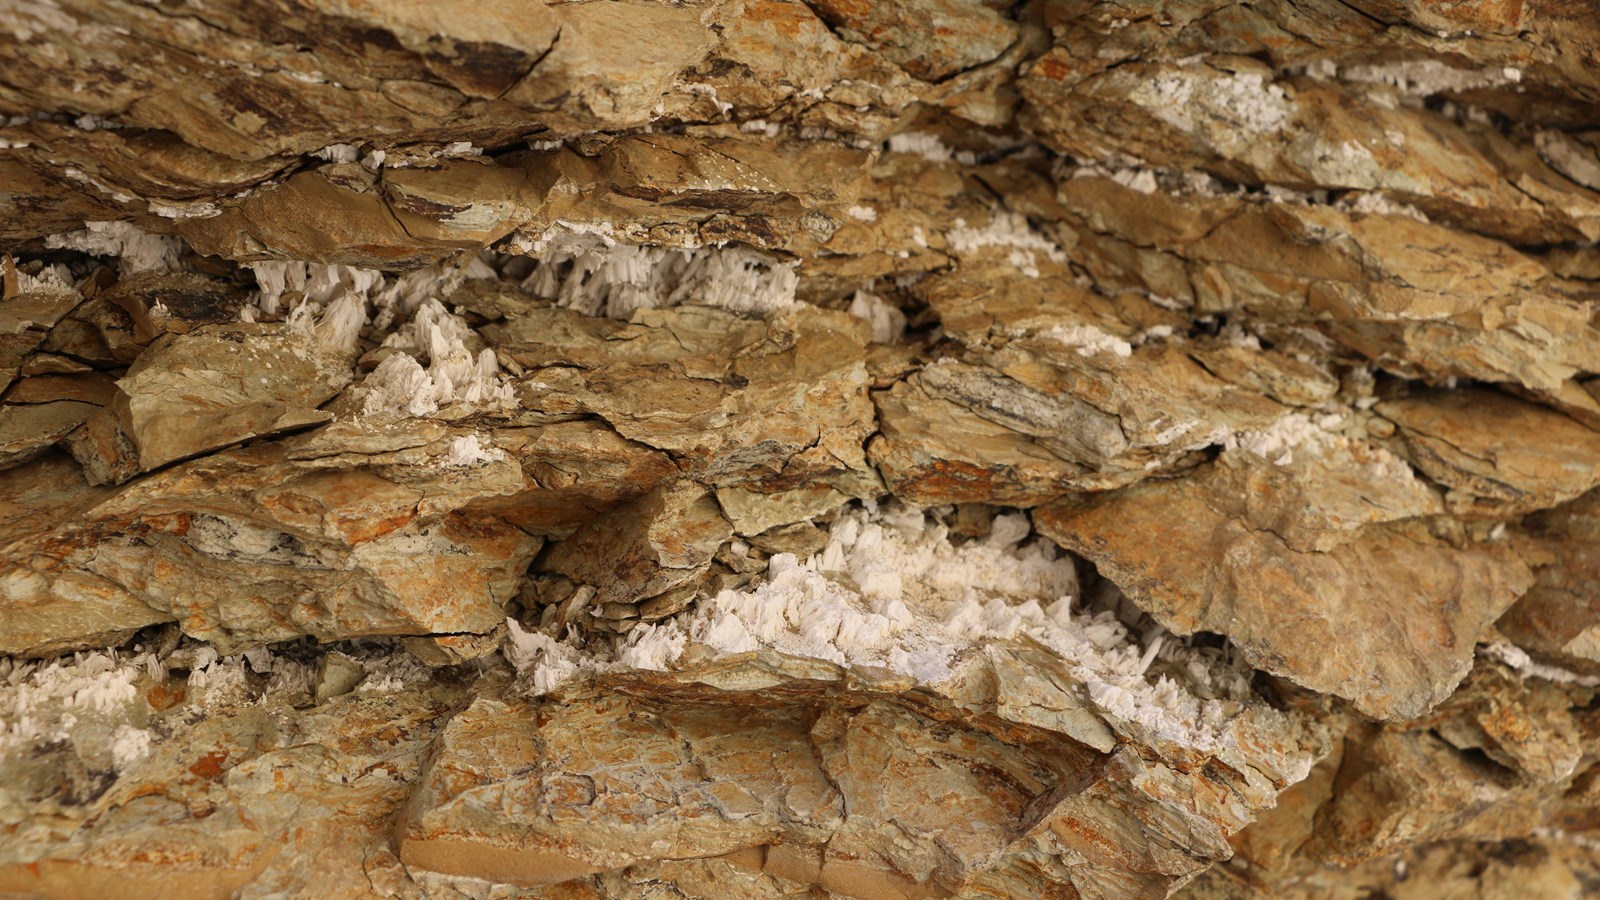 Small white mineral crystals grow between layers of brown rock.